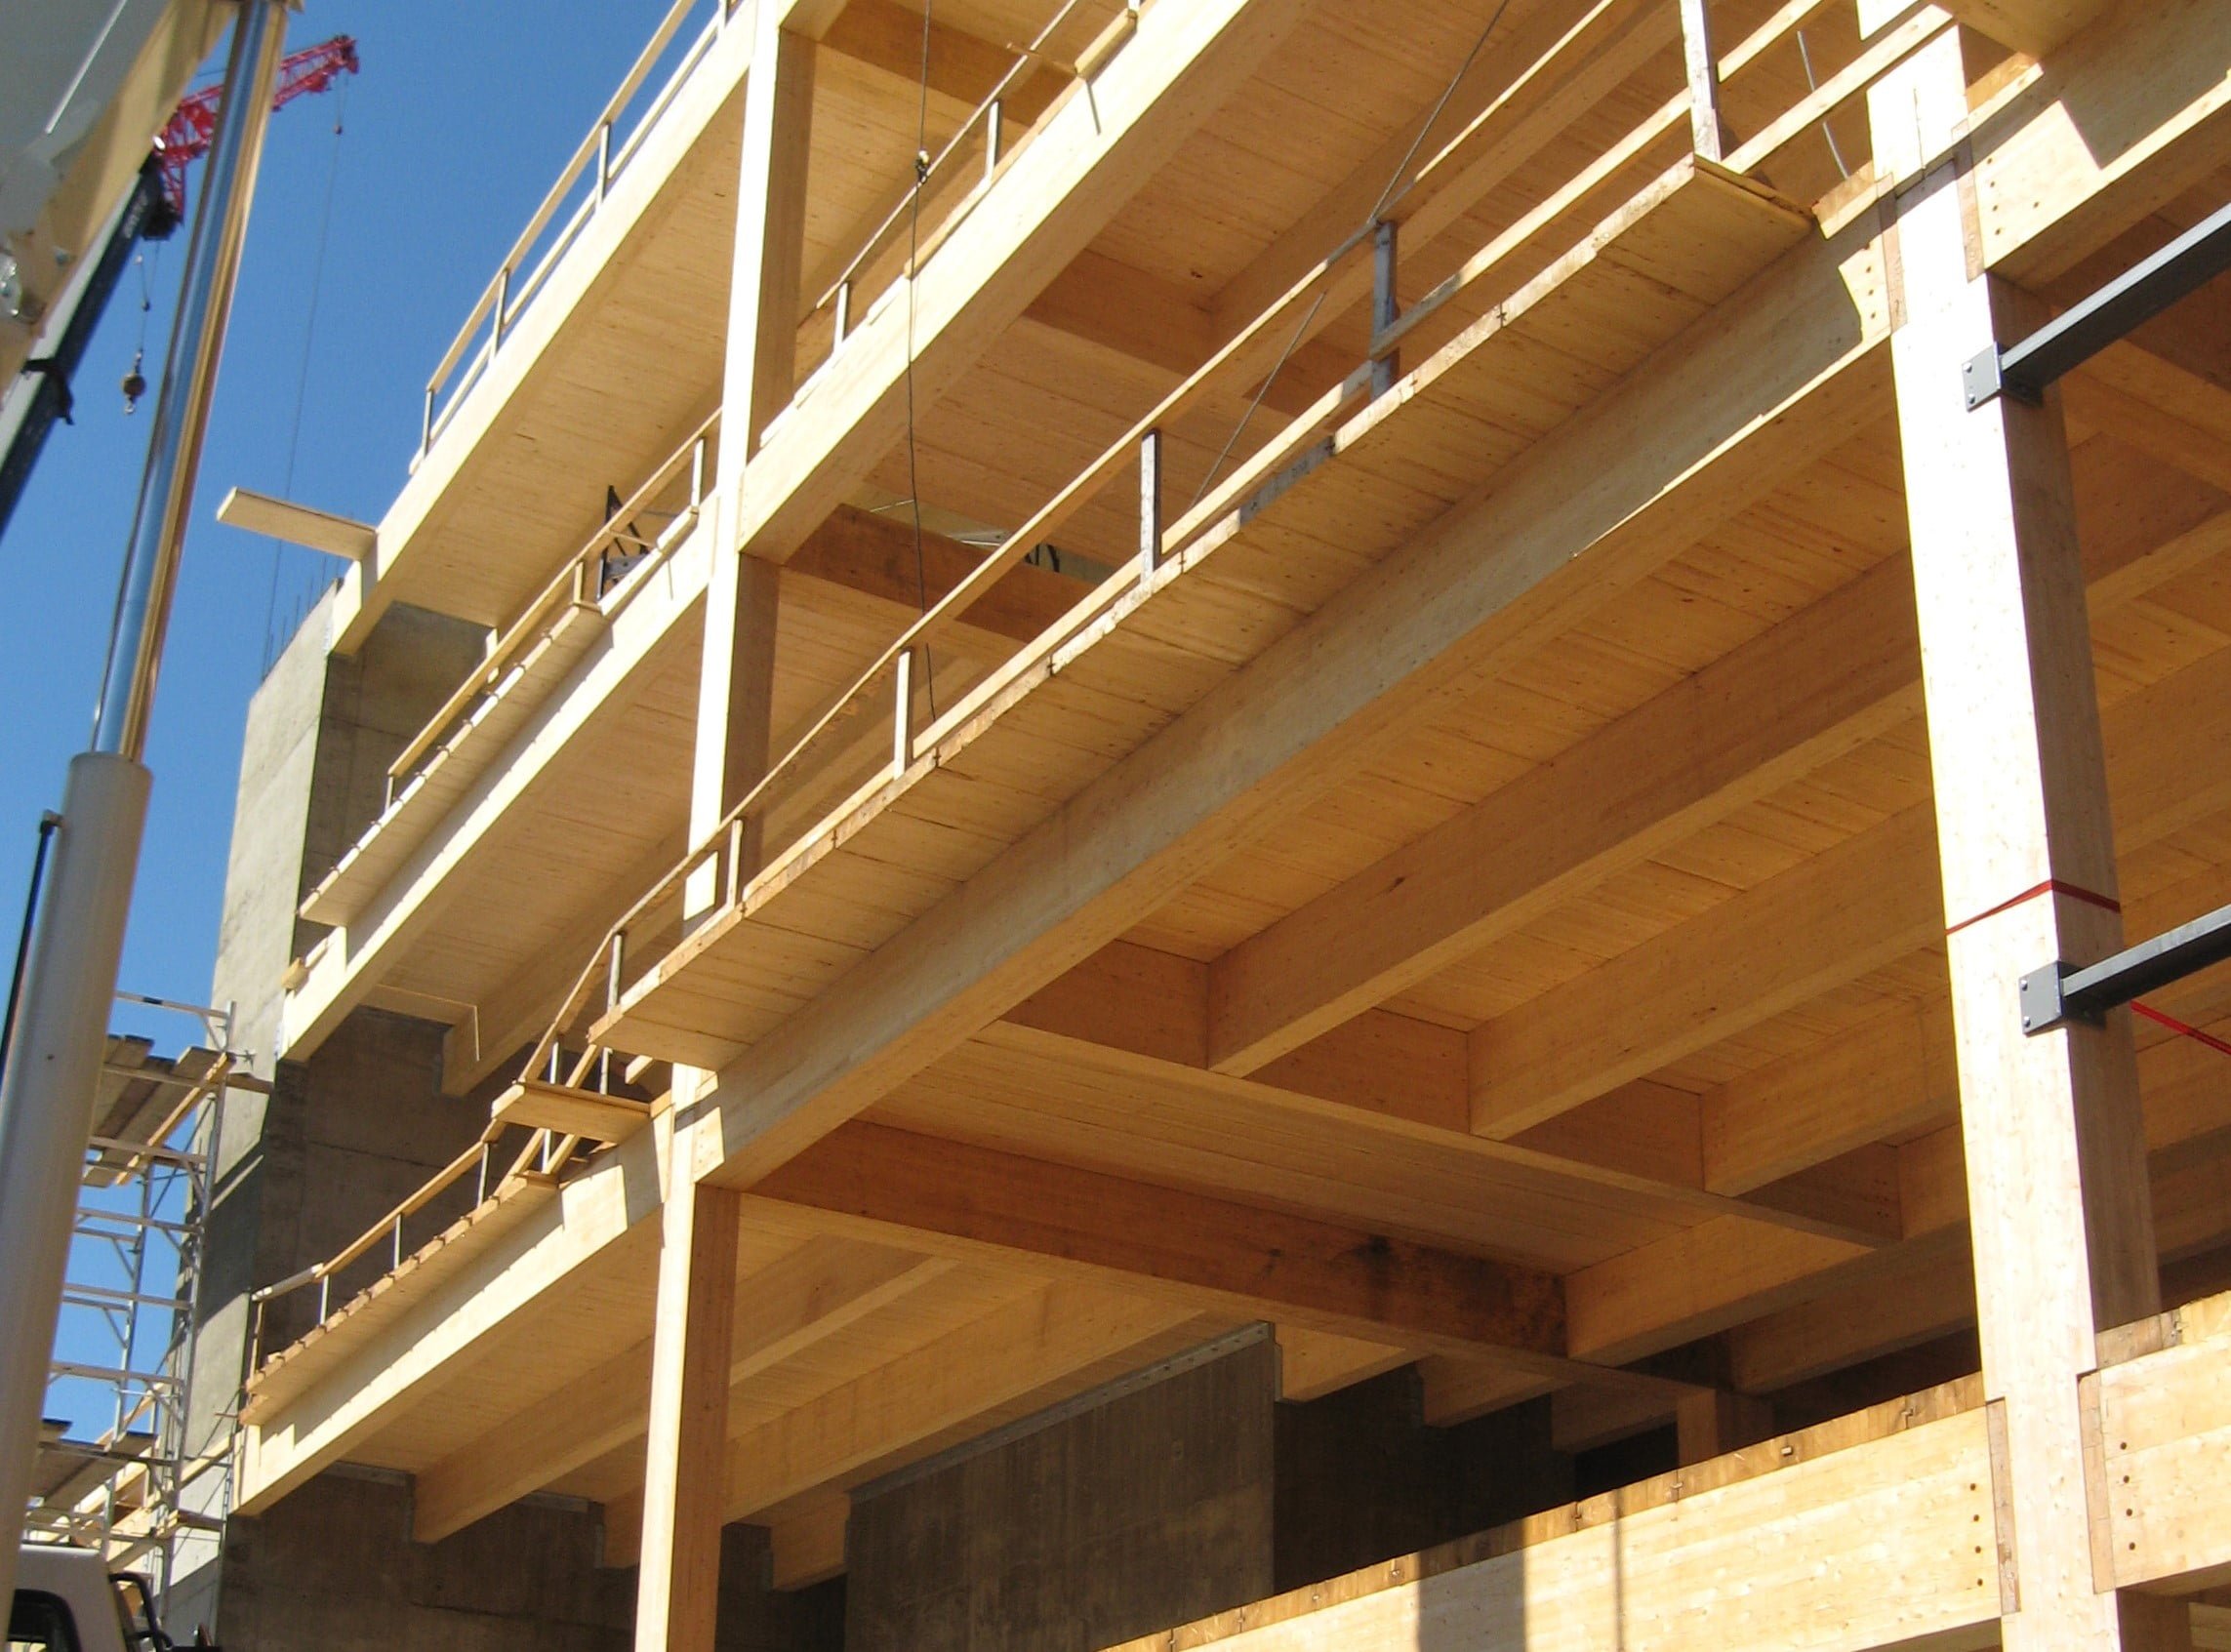 Timber-concrete composite floors: a winning approach for massive wood construction